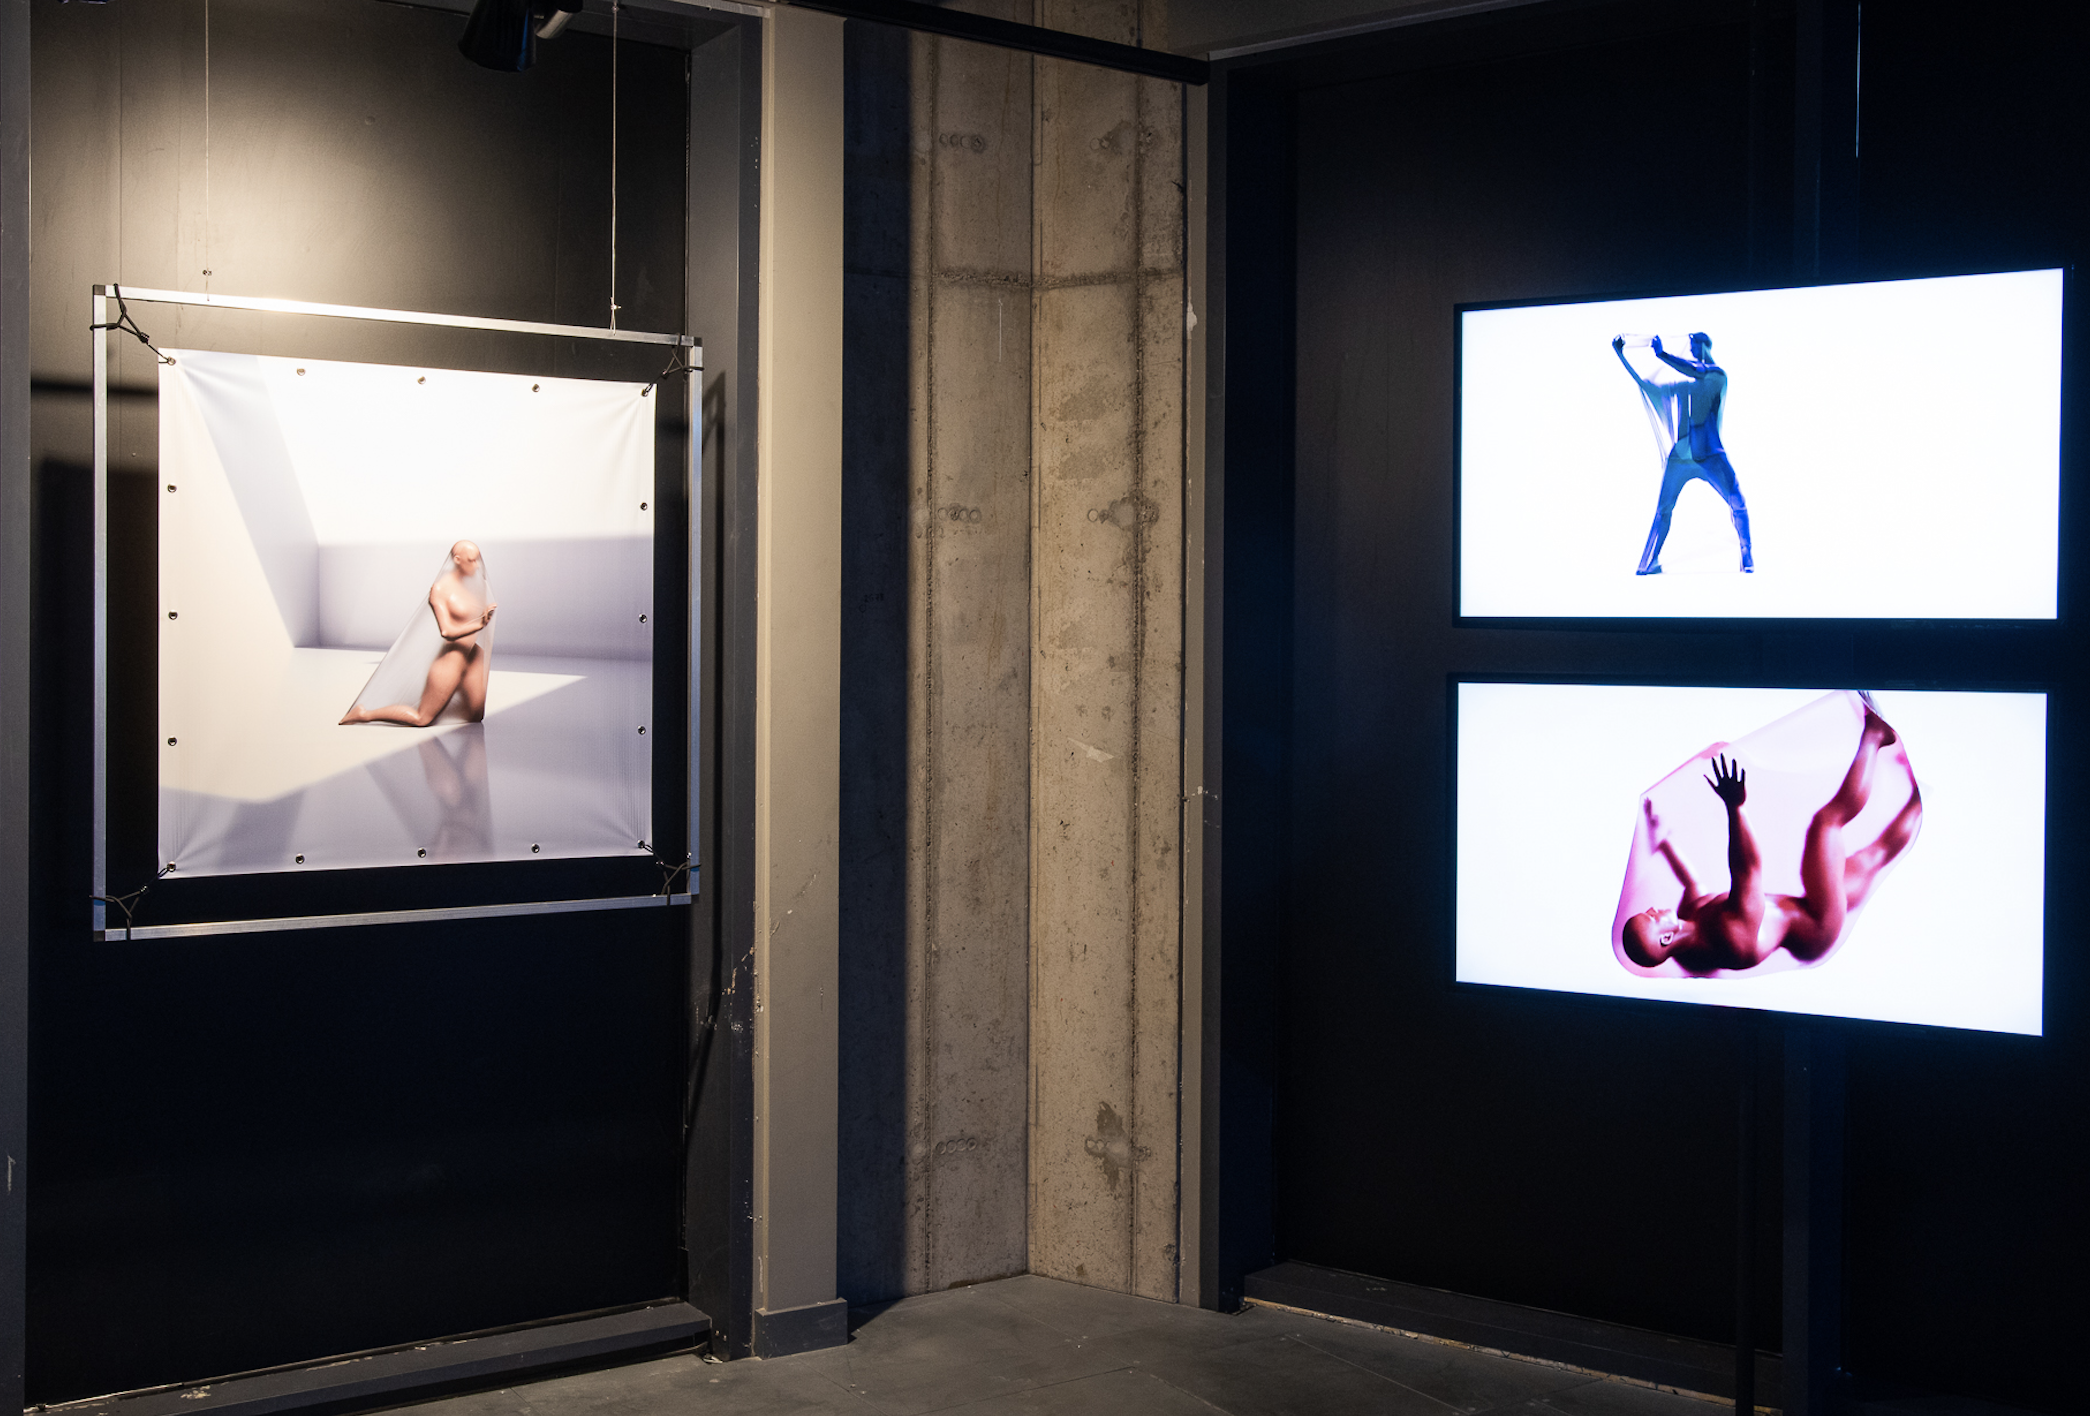 Installation view: 'Powerplay'. Photo by Max Colson, courtesy of arebyte Gallery.